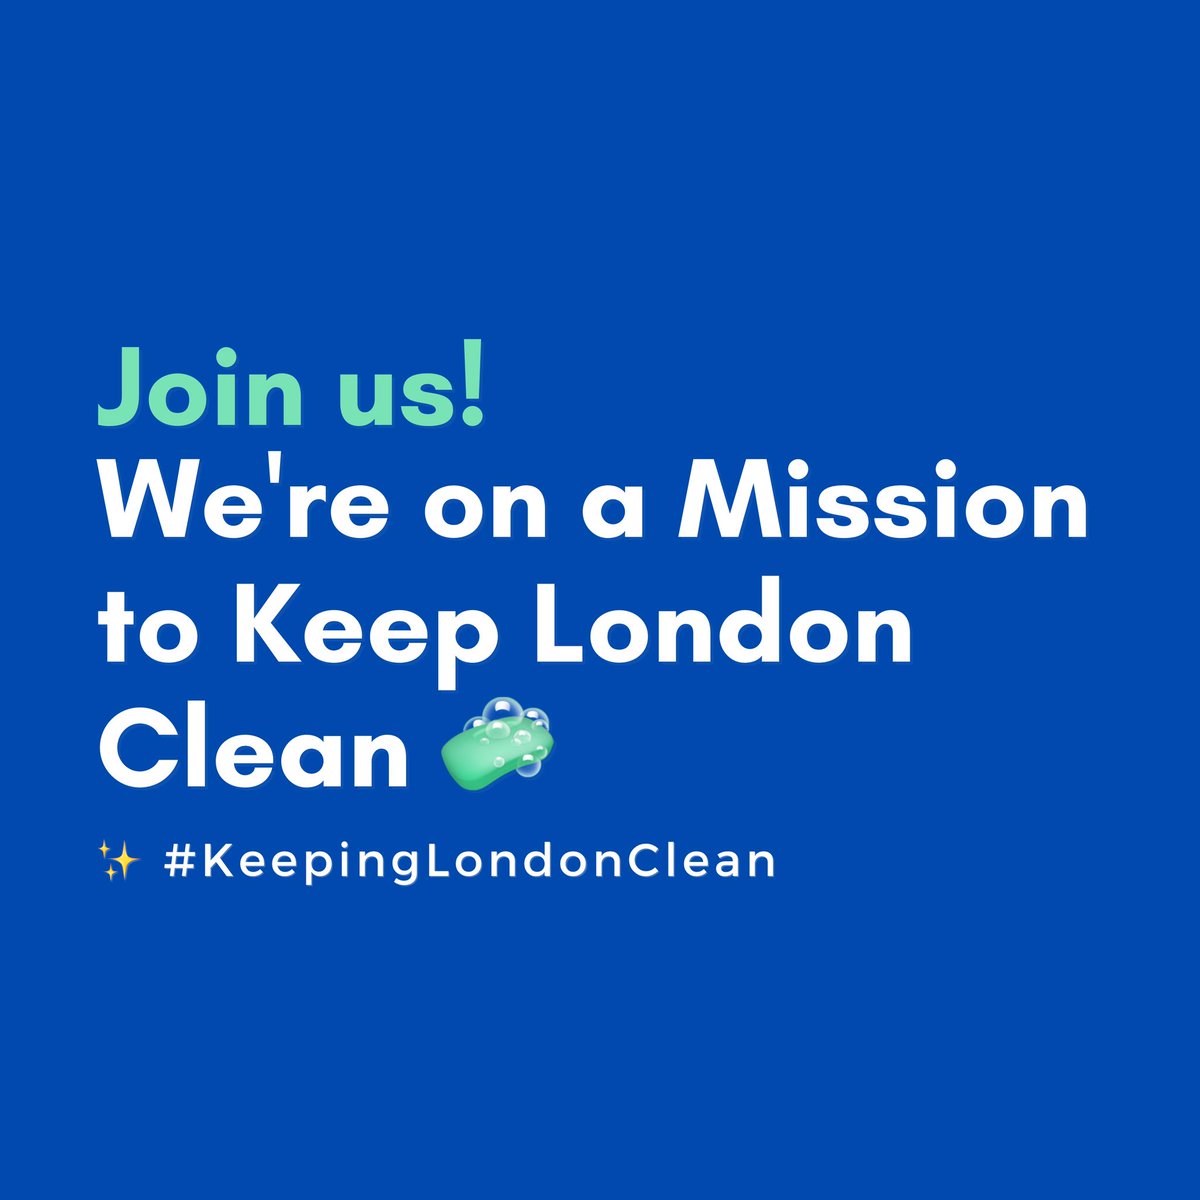 🌟 We’re on a Mission to Keep London Clean! 

🚮 #KeepingLondonClean 
🧼 #ProfessionalCleaning
🔧 #FacilitiesManagement 
🌱 #GreenSpaces 
🏢 #OfficeMaintenance
🚺 #WashroomHygiene 
🧴#JanitorialSupplies  

Exceptional Cleaning Every Time. 
📞 0800 0234 058